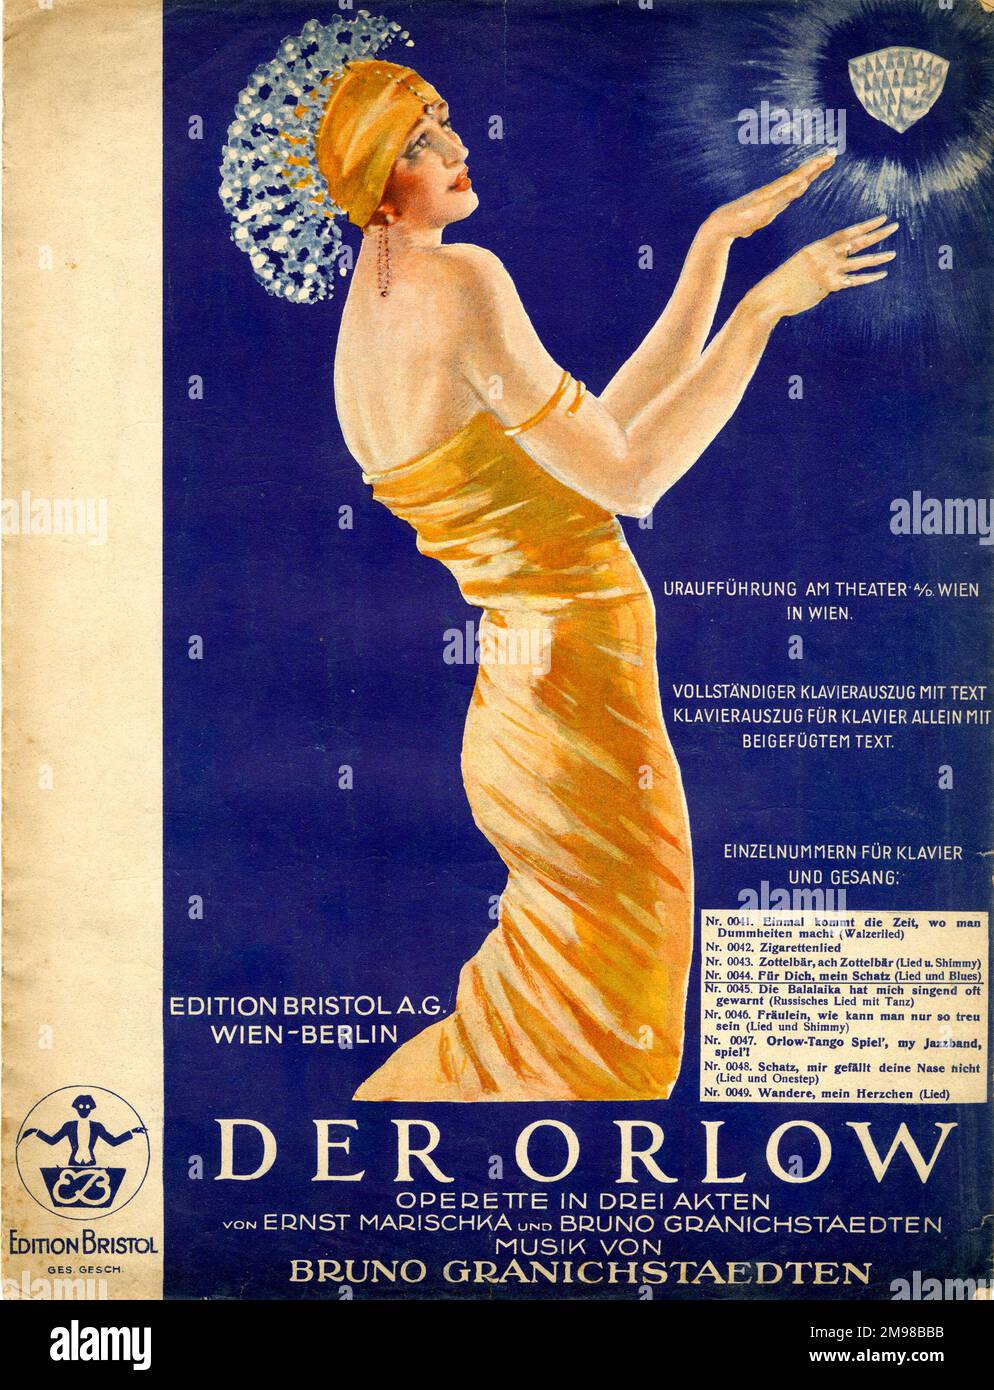 Music cover, Der Orlow, an operetta in three acts, with words by Ernst Marischka and Bruno Granichstaedten and music by Bruno Granichstaedten (1879-1944).  Premiere at the Theater am der Wien (Vienna, Austria).  Piano score with text.  It is a Viennese operetta with jazz and blues music included.  The title refers to a diamond. Stock Photo